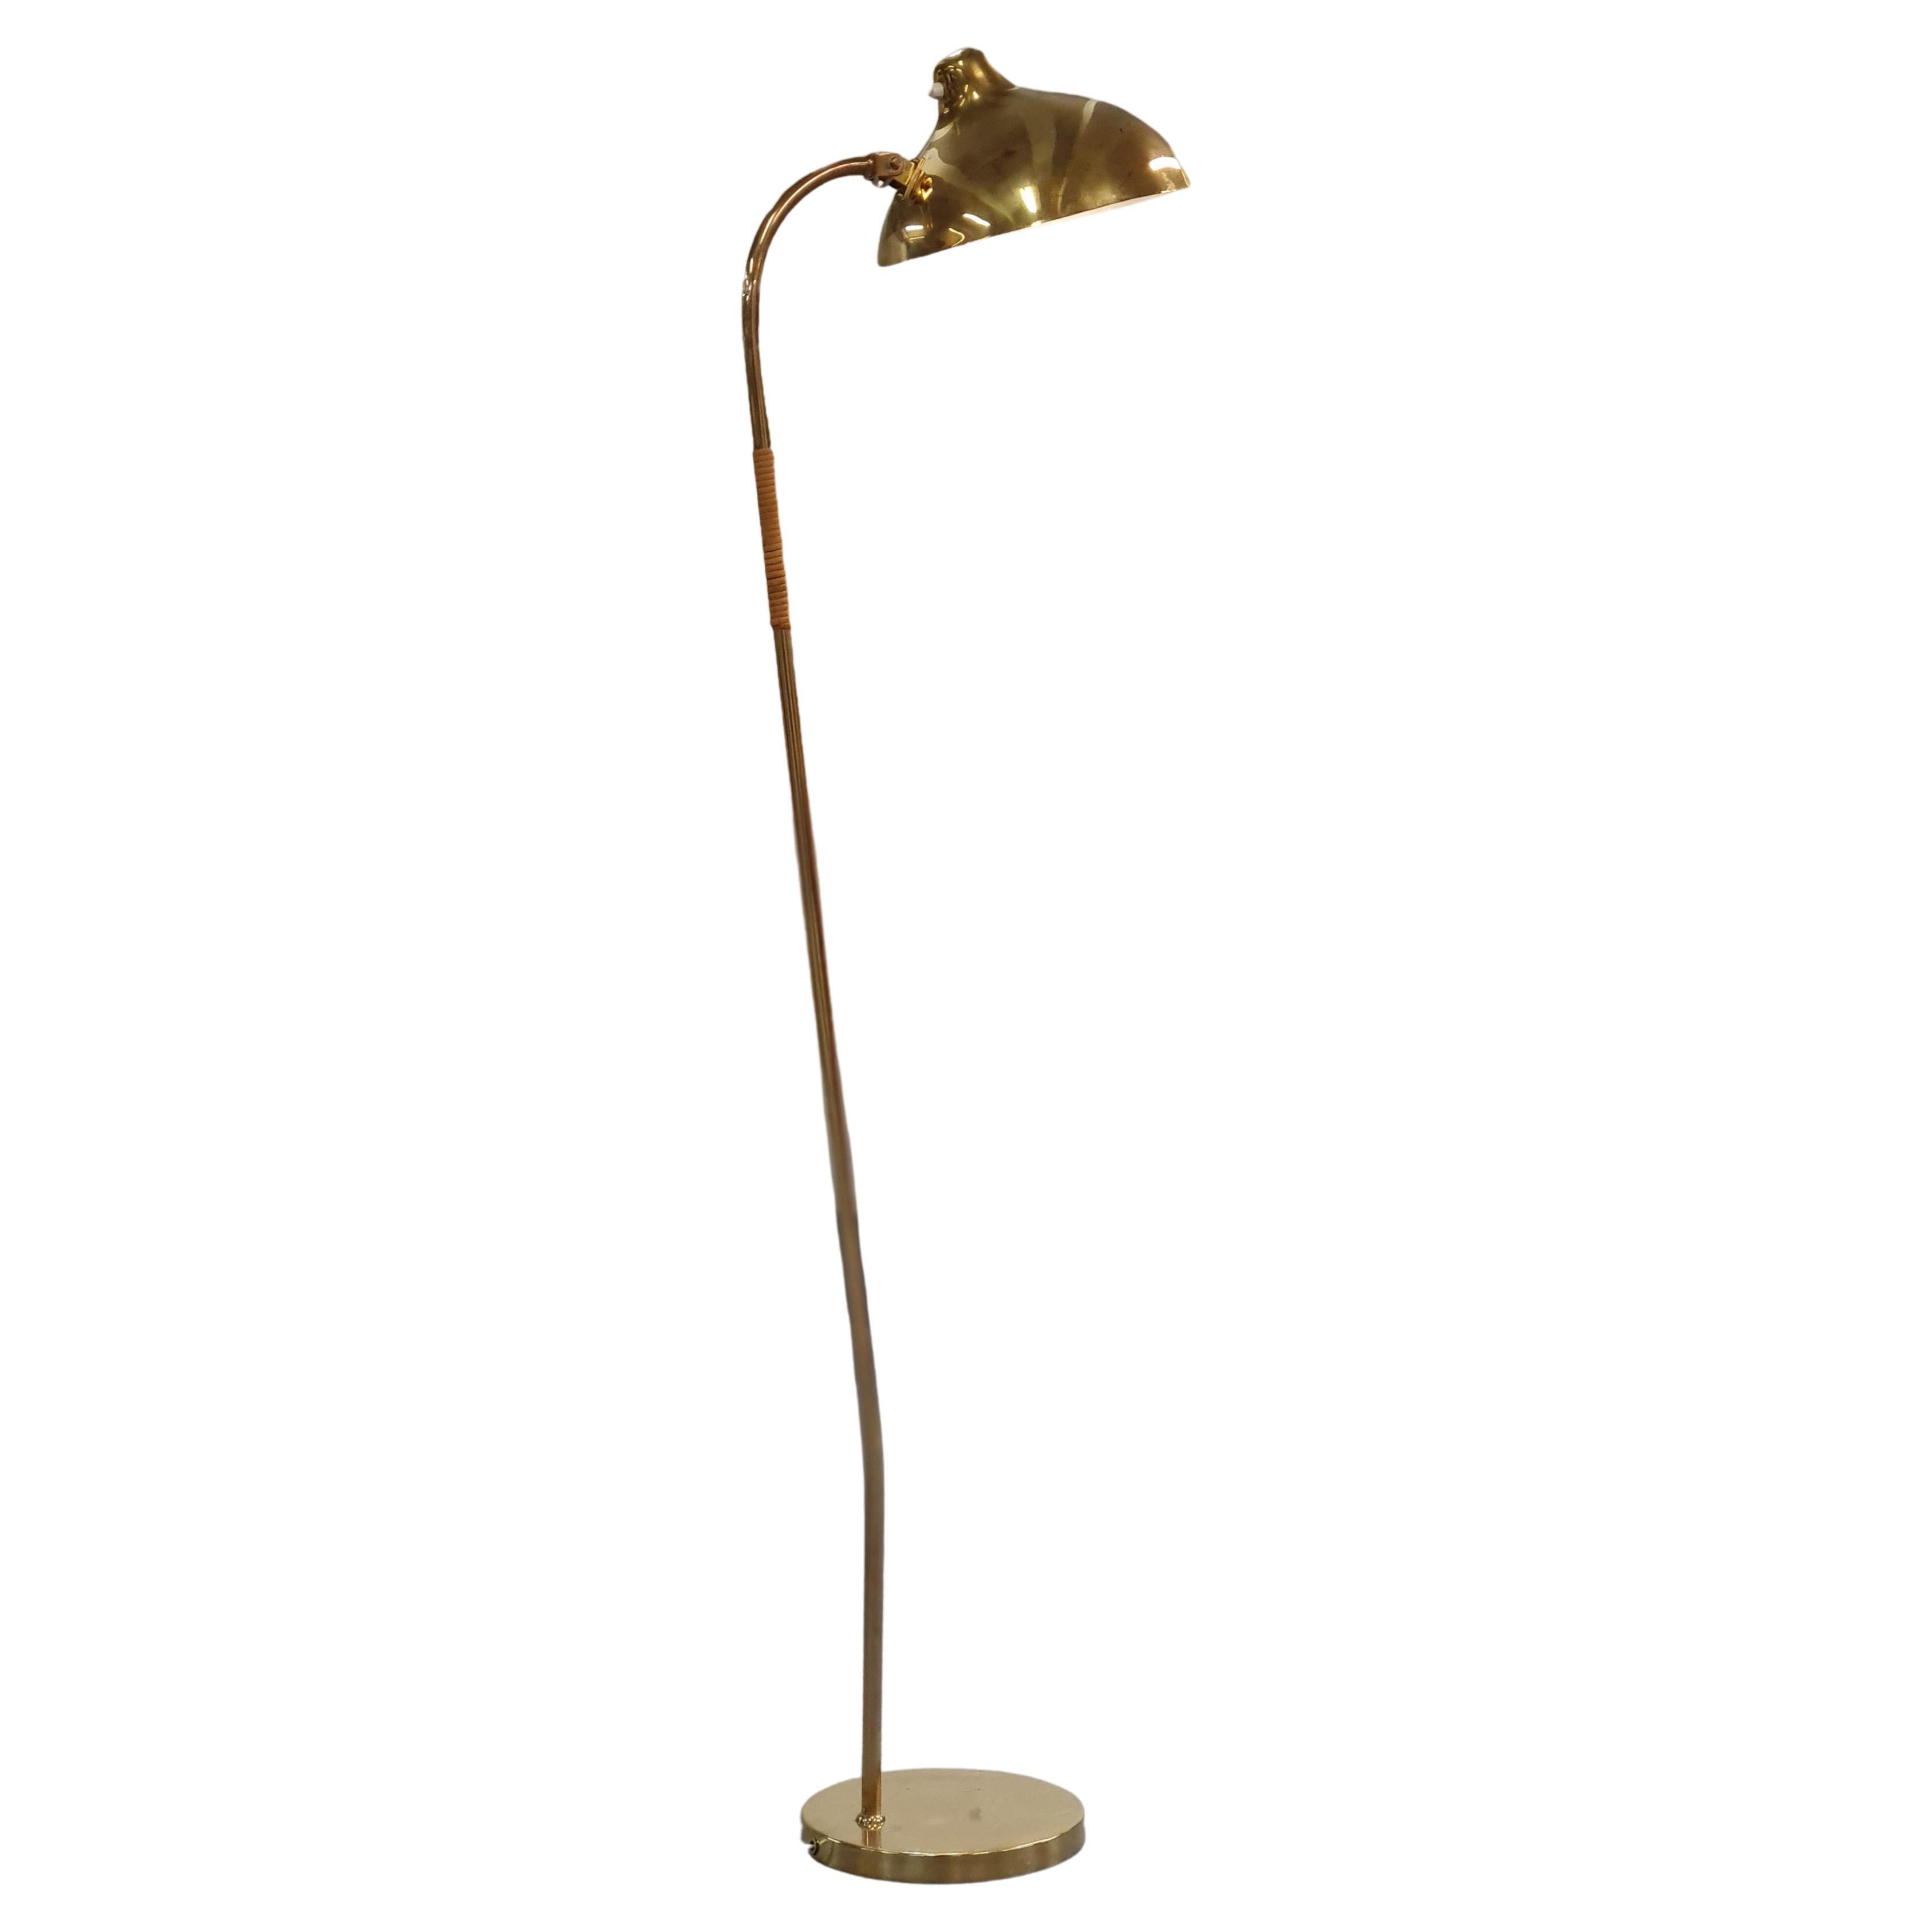 Exceedingly Rare Gunnel Nyman Floor Lamp Model No. 62044 by Idman, 1940 For Sale